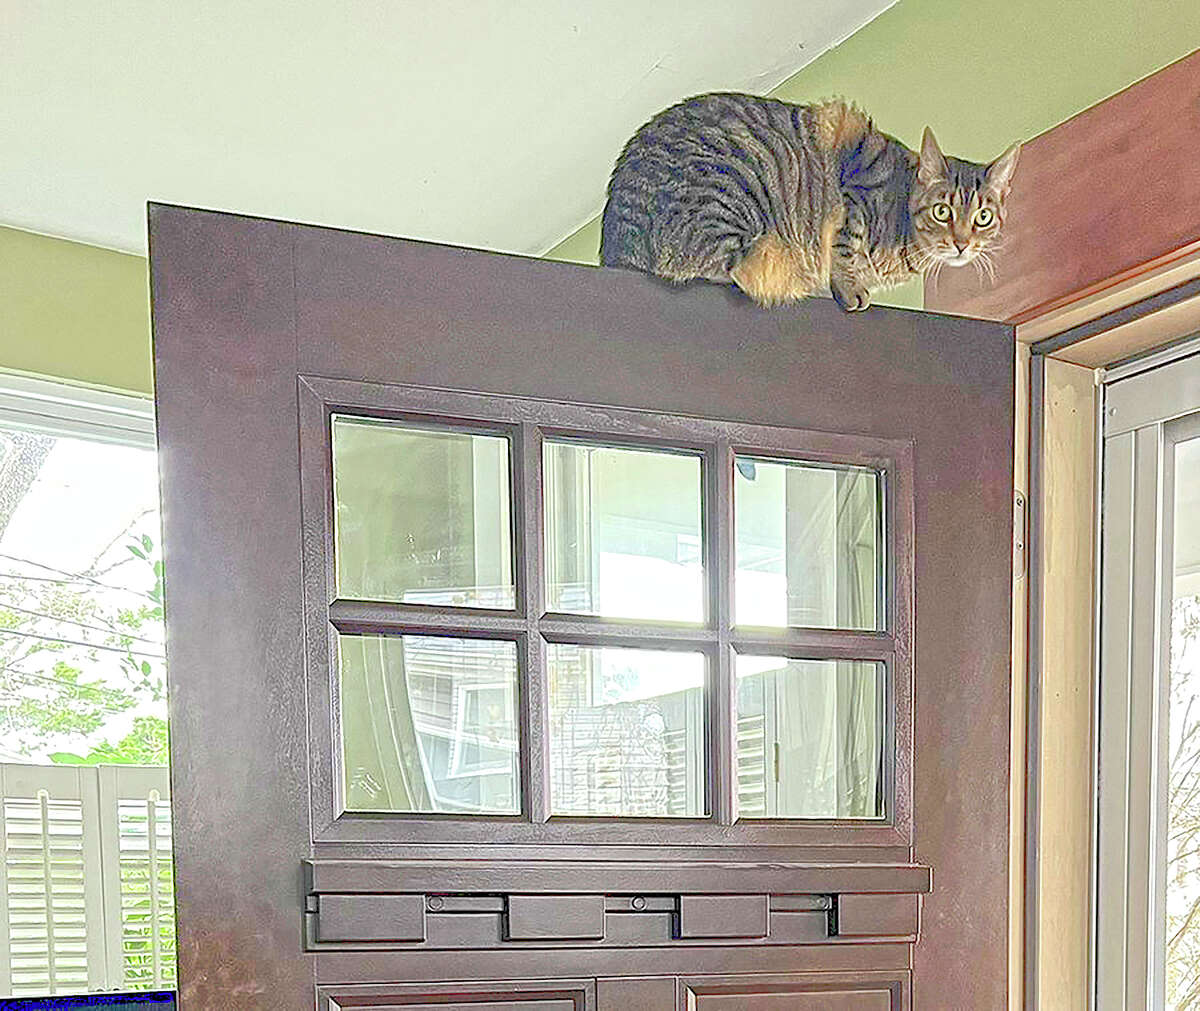 A cat is perched on top of a door. Because cats have exceptional agility and climbing skills, it can be difficult, if not impossible, to place plants and other items out of their reach.